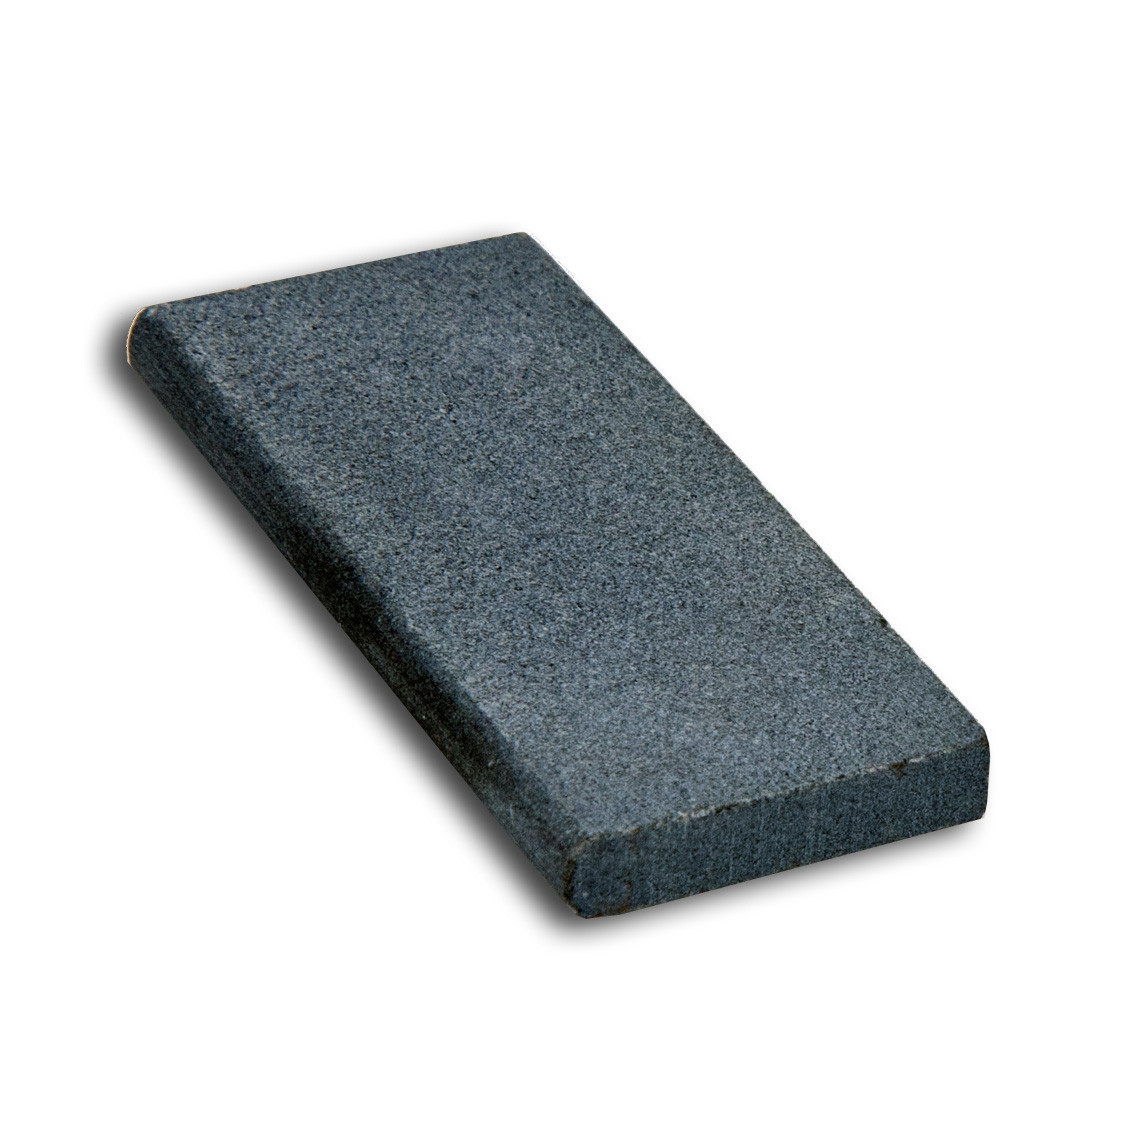 Natural stone for sharpening professional instruments Tiger No.2